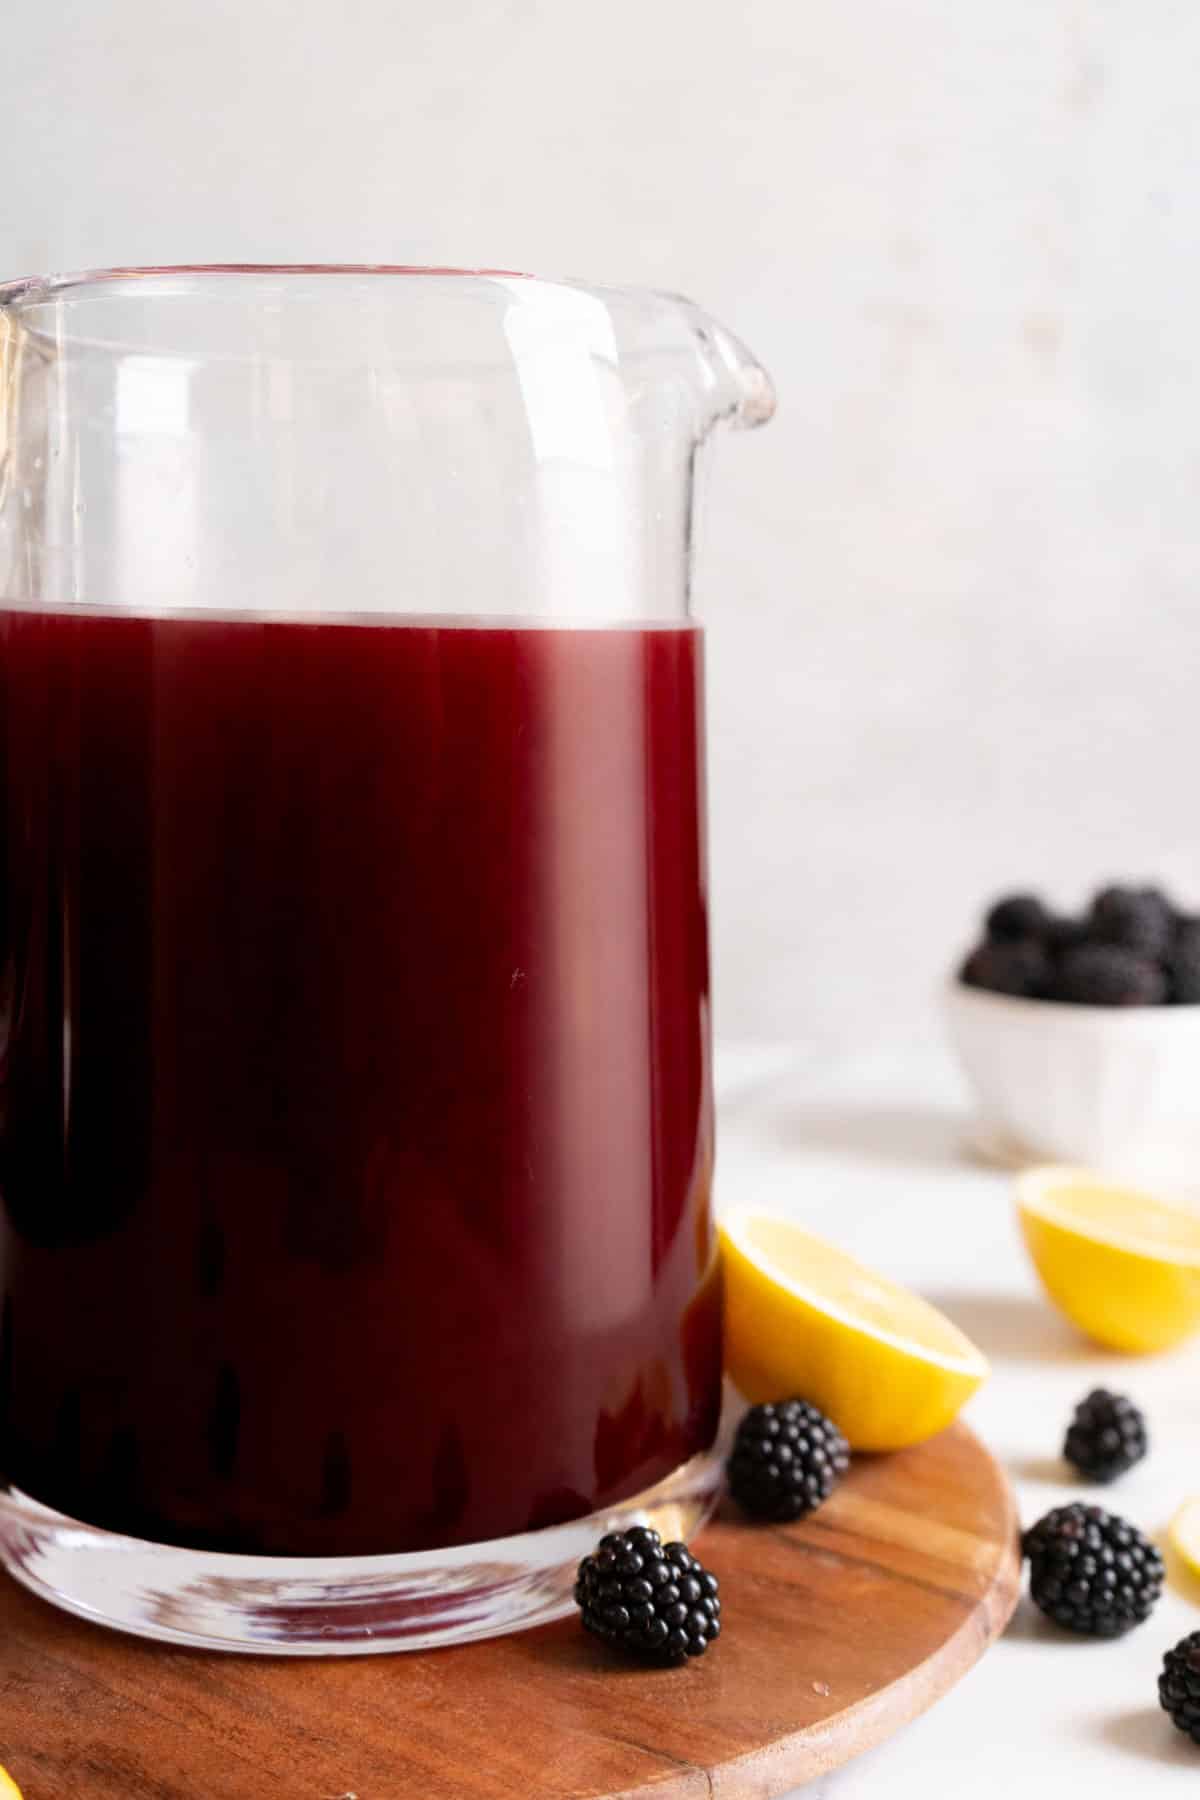 Pouring blackberry syrup into lemonade.